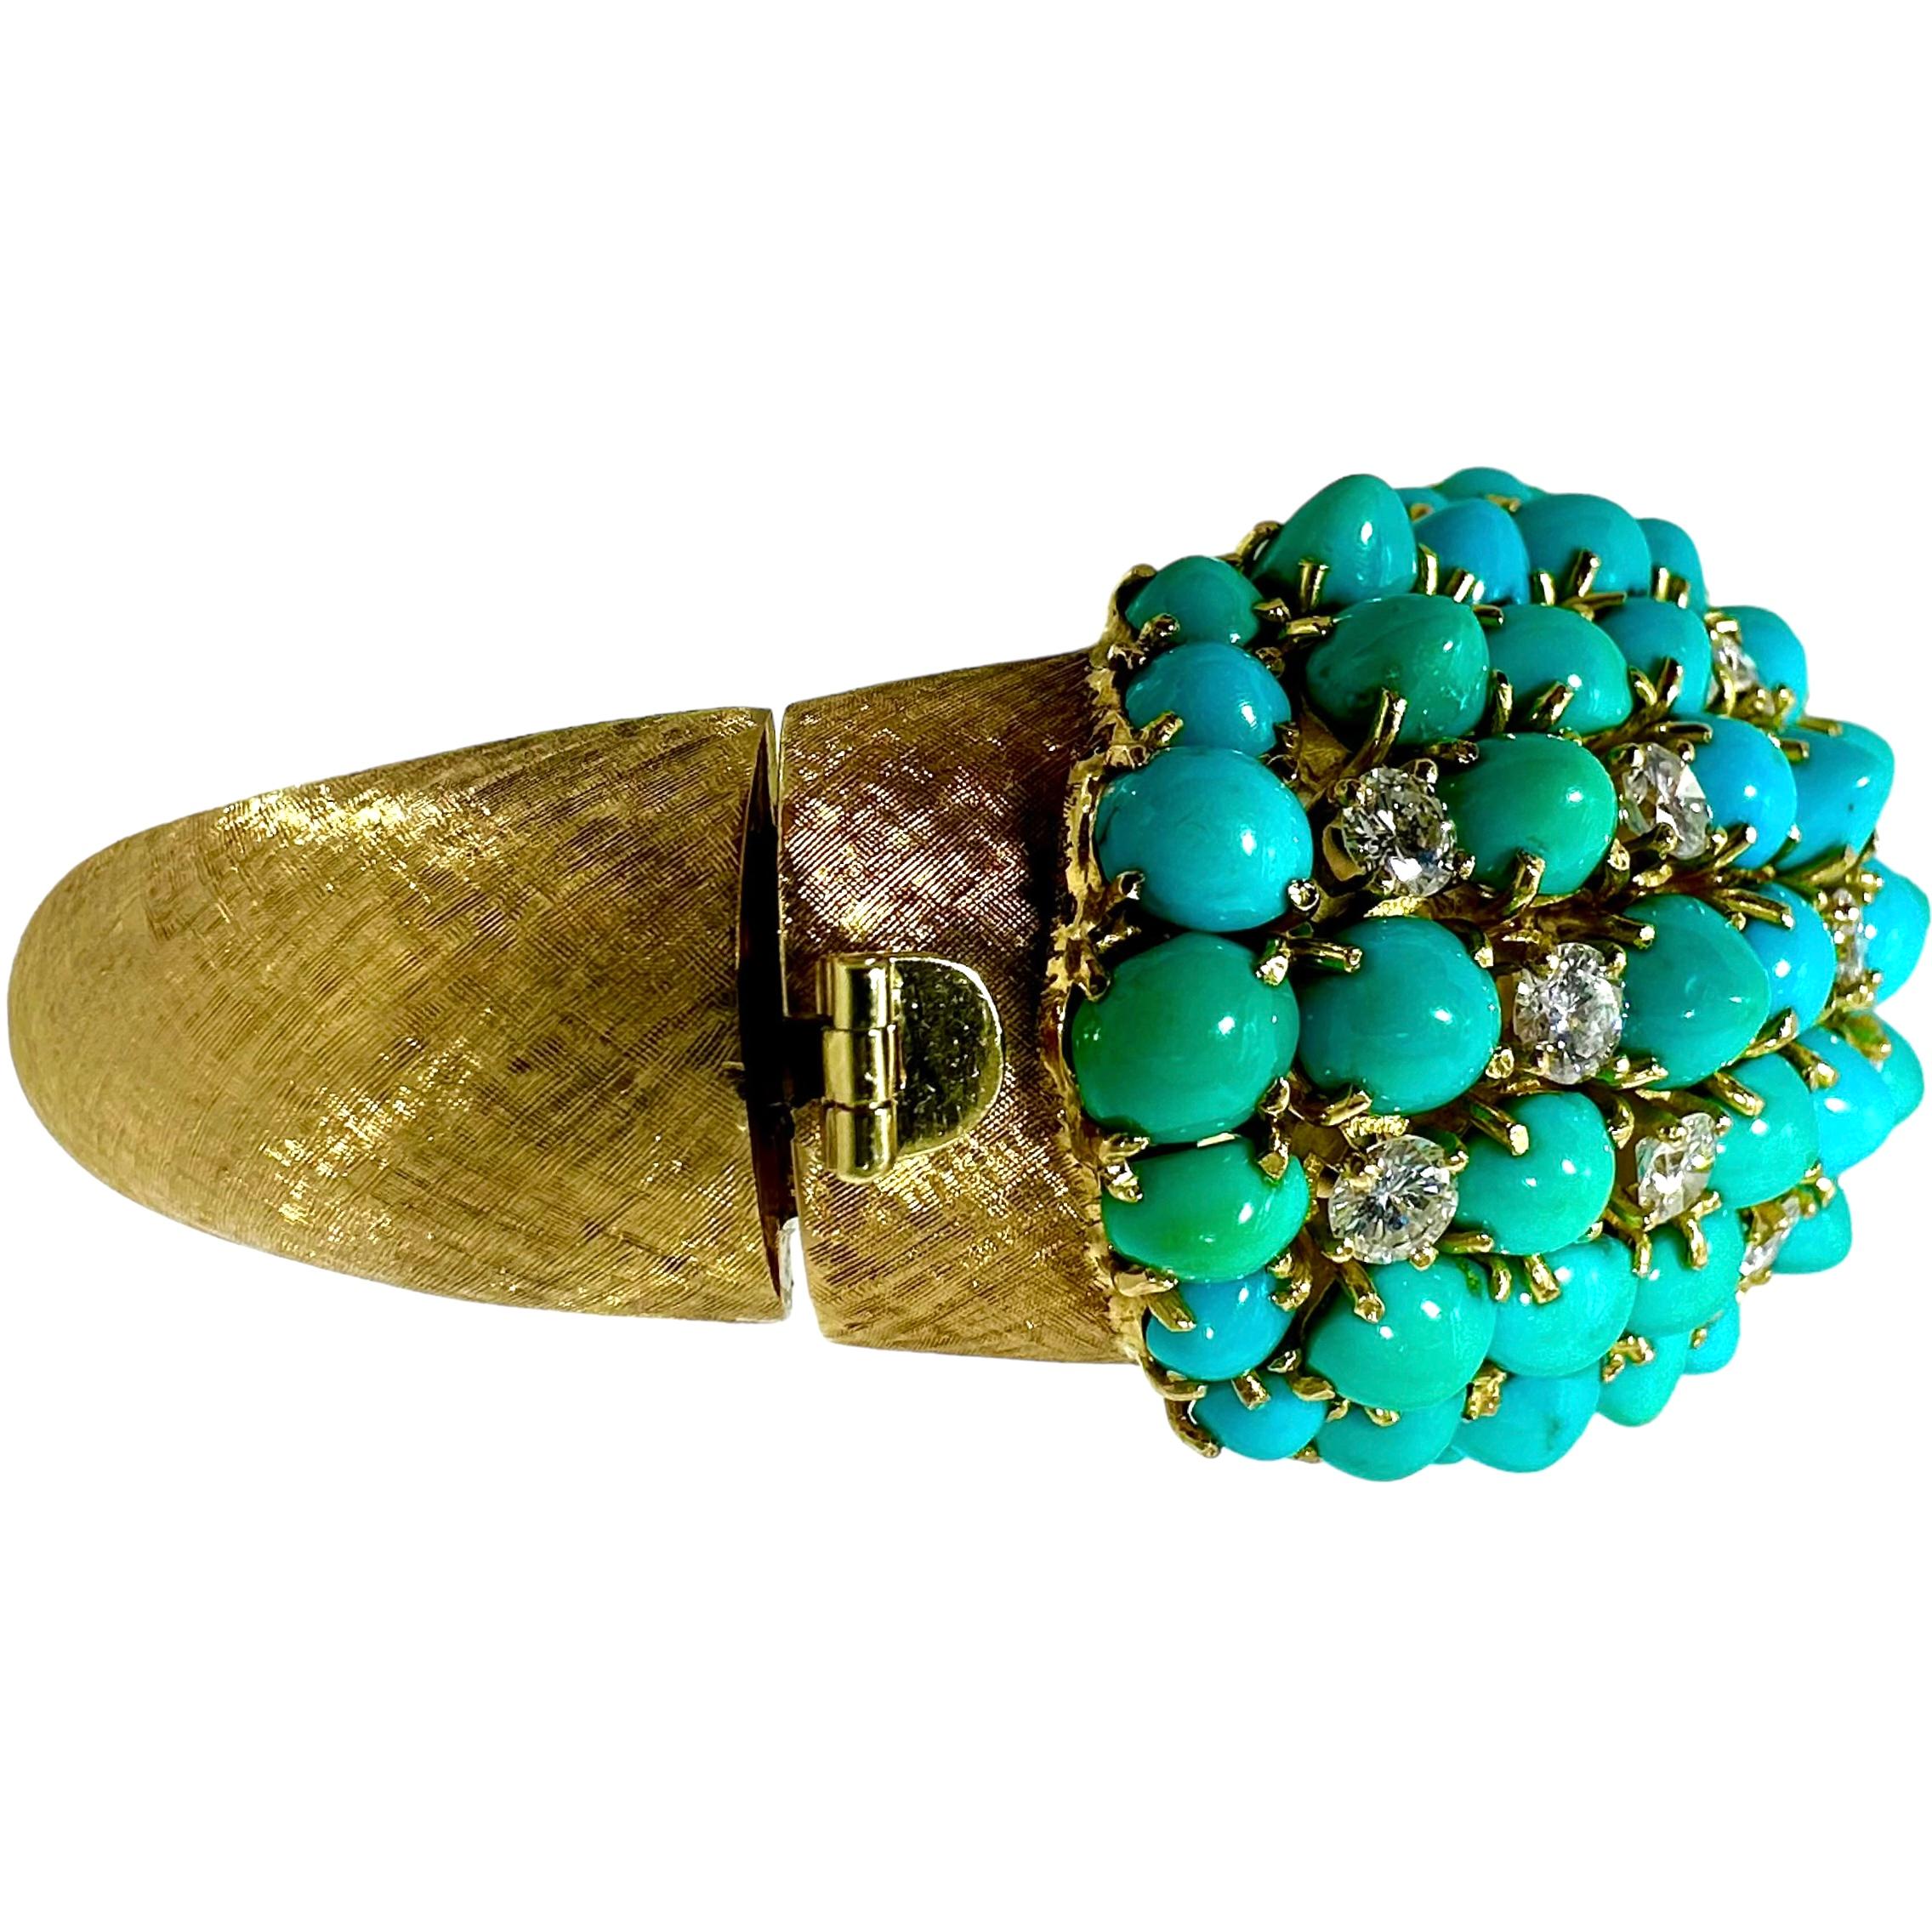 Vintage, Massive Scale, Gold, Diamond and Turquoise Bombe Dome Cocktail Bracelet For Sale 5